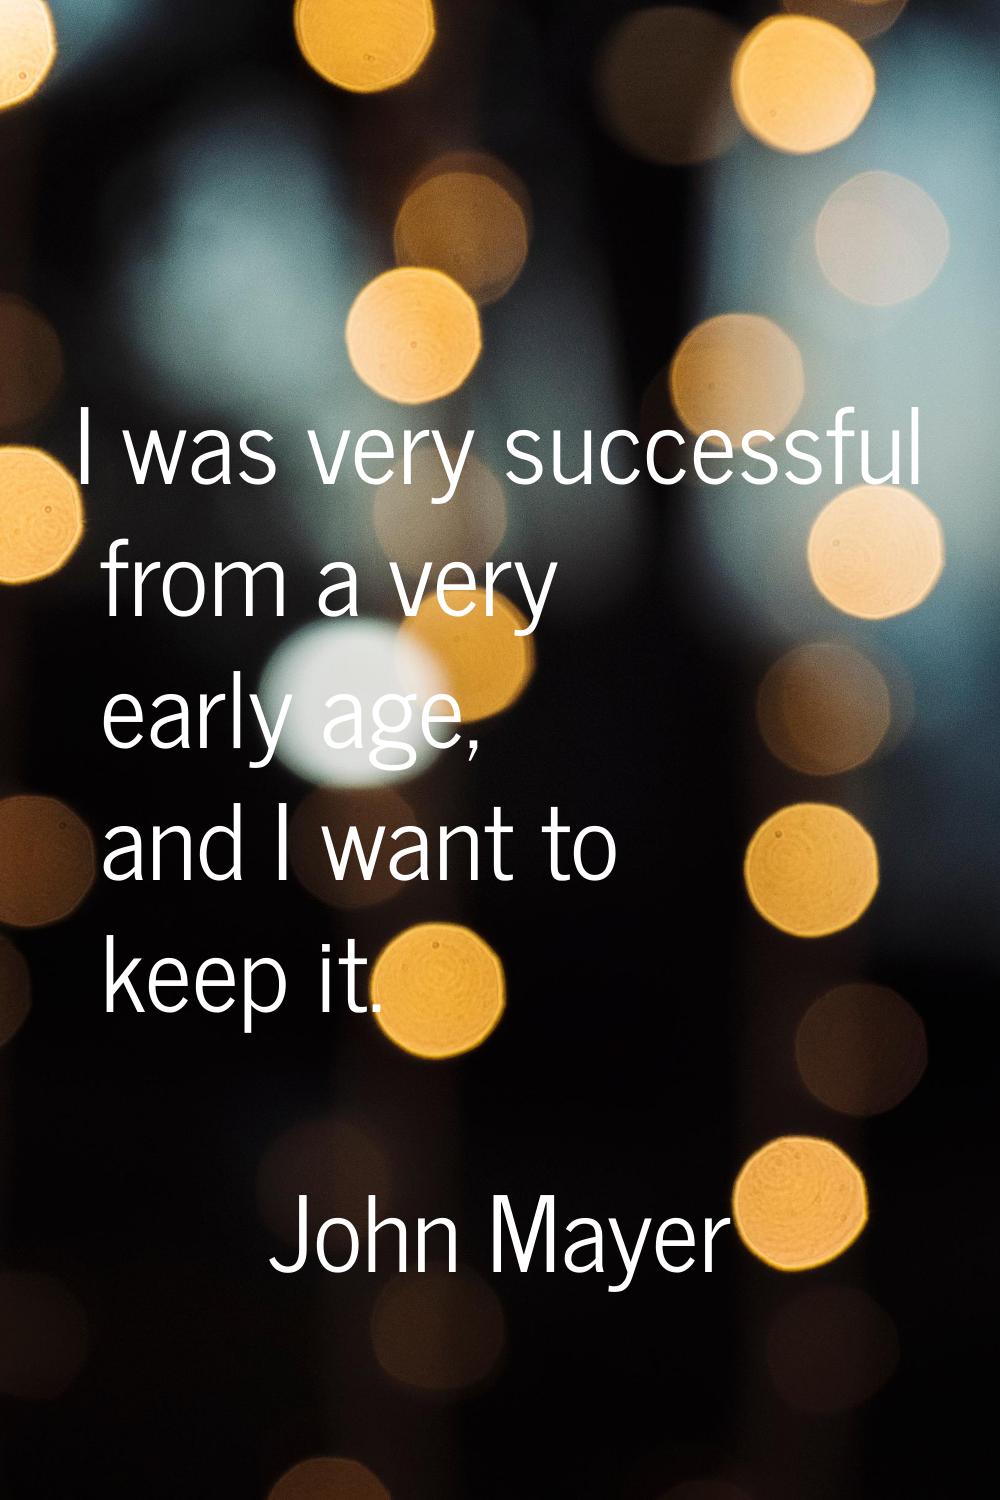 I was very successful from a very early age, and I want to keep it.